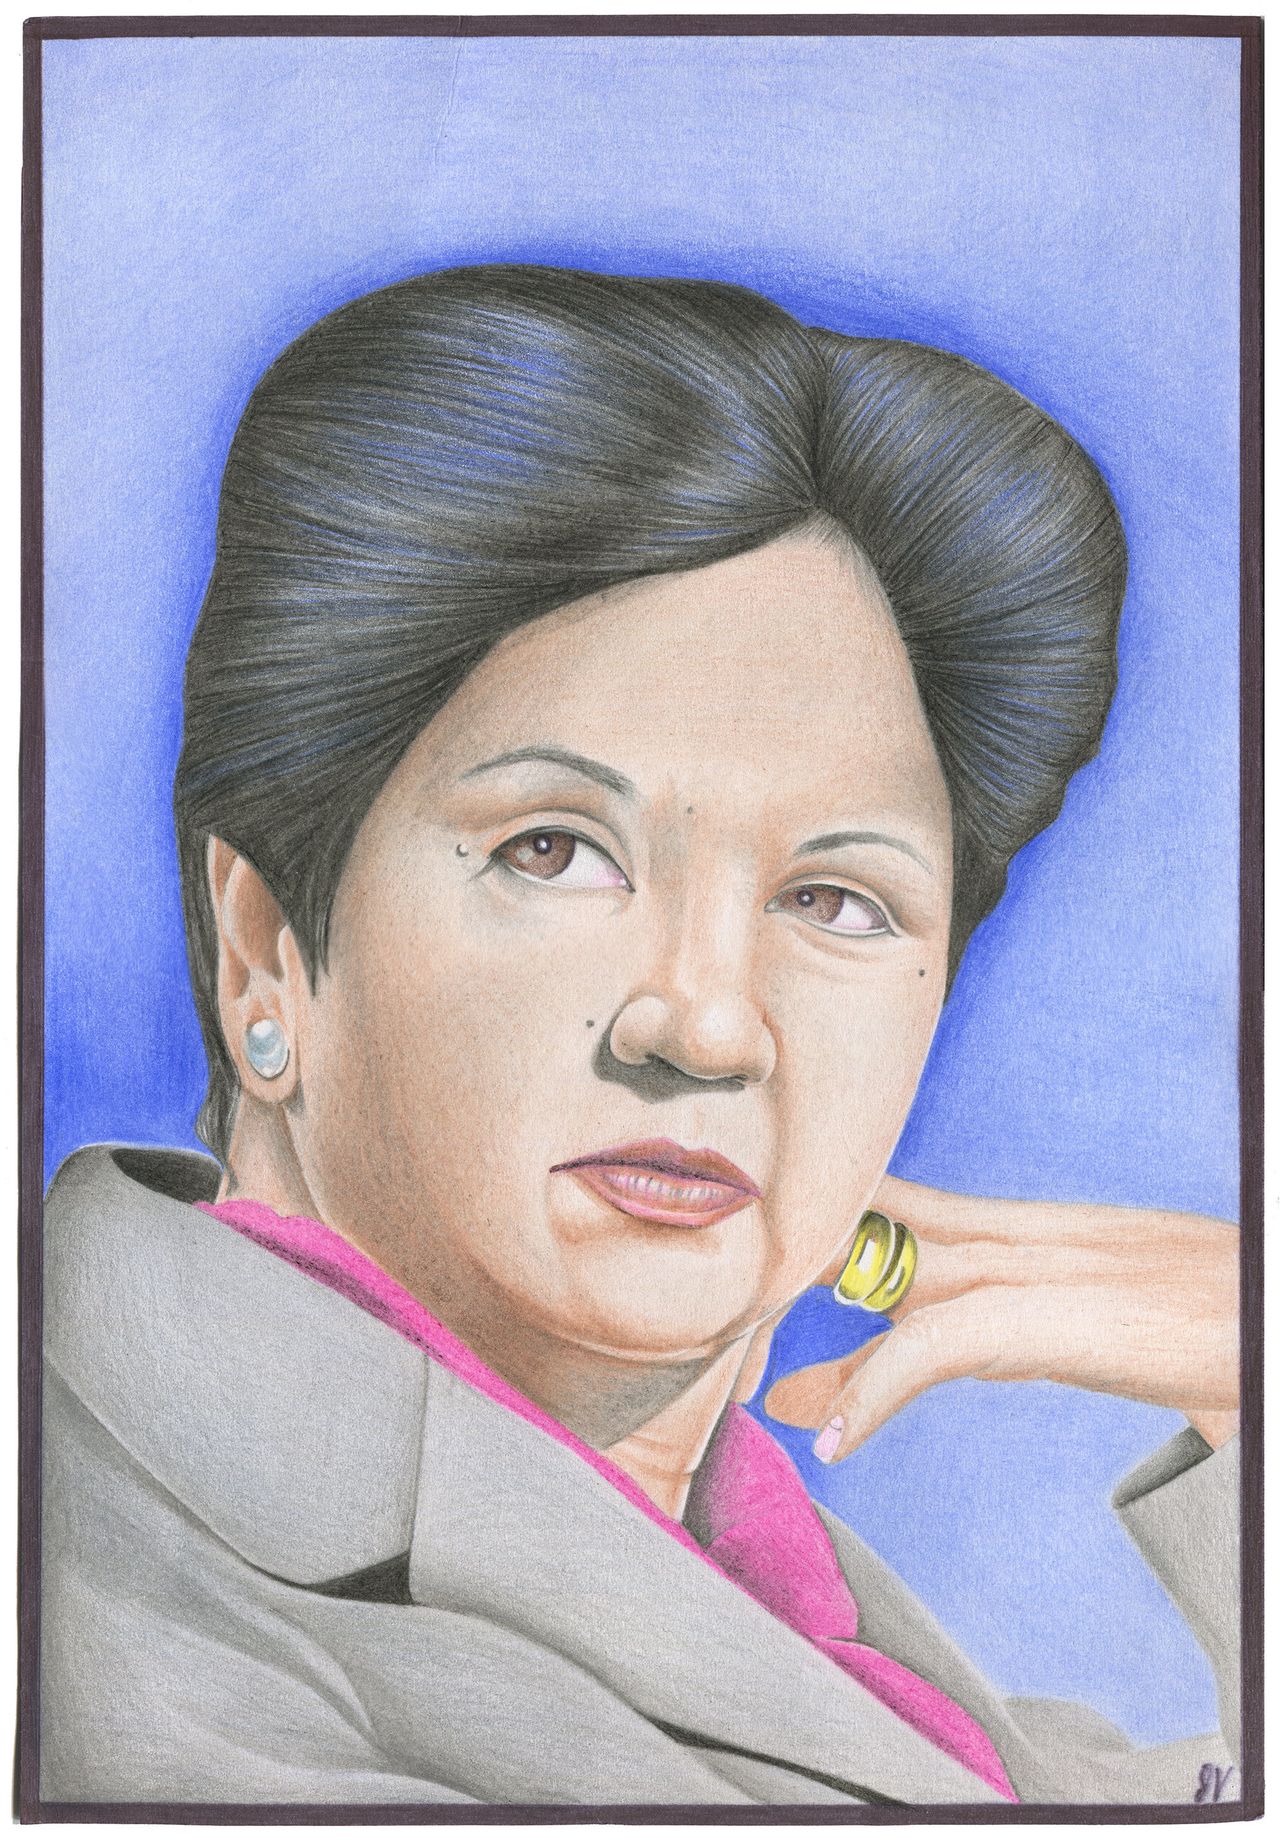 John Vercusky (Prison ID #55341-0) drew CEO of Pepsico Indra Nooyi. Nooyi is accused of accessory to murder, conspiracy to deceive, environmental crimes and public endangerment. Vercusky is currently serving 22 years for armed robbery. Read more here.